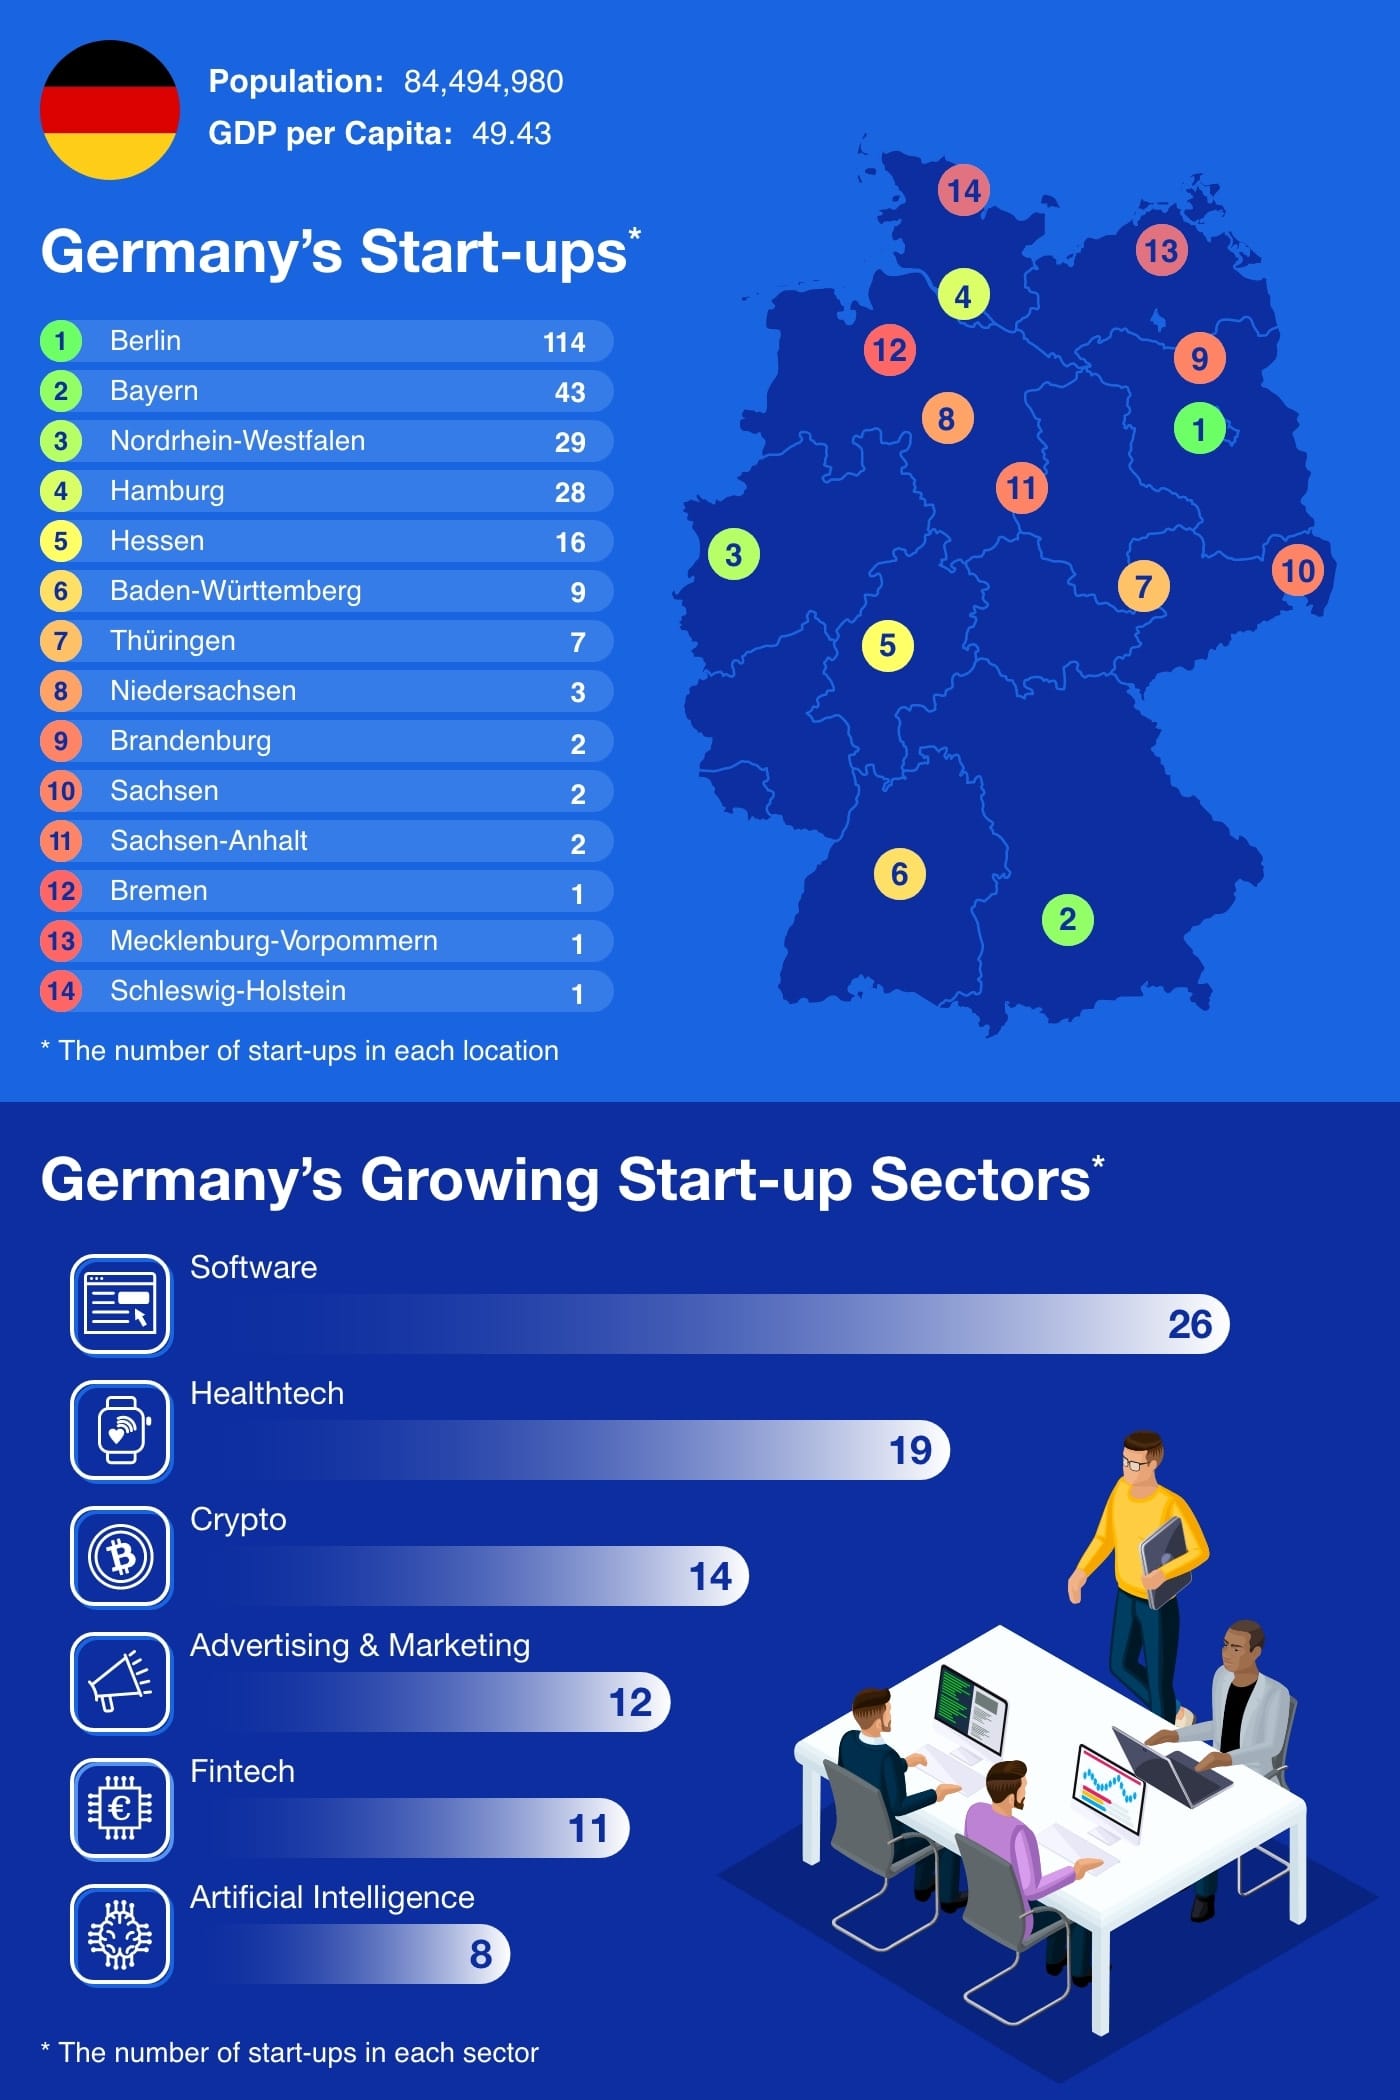 Infographic showing the number of Germany's start-ups by location and sector